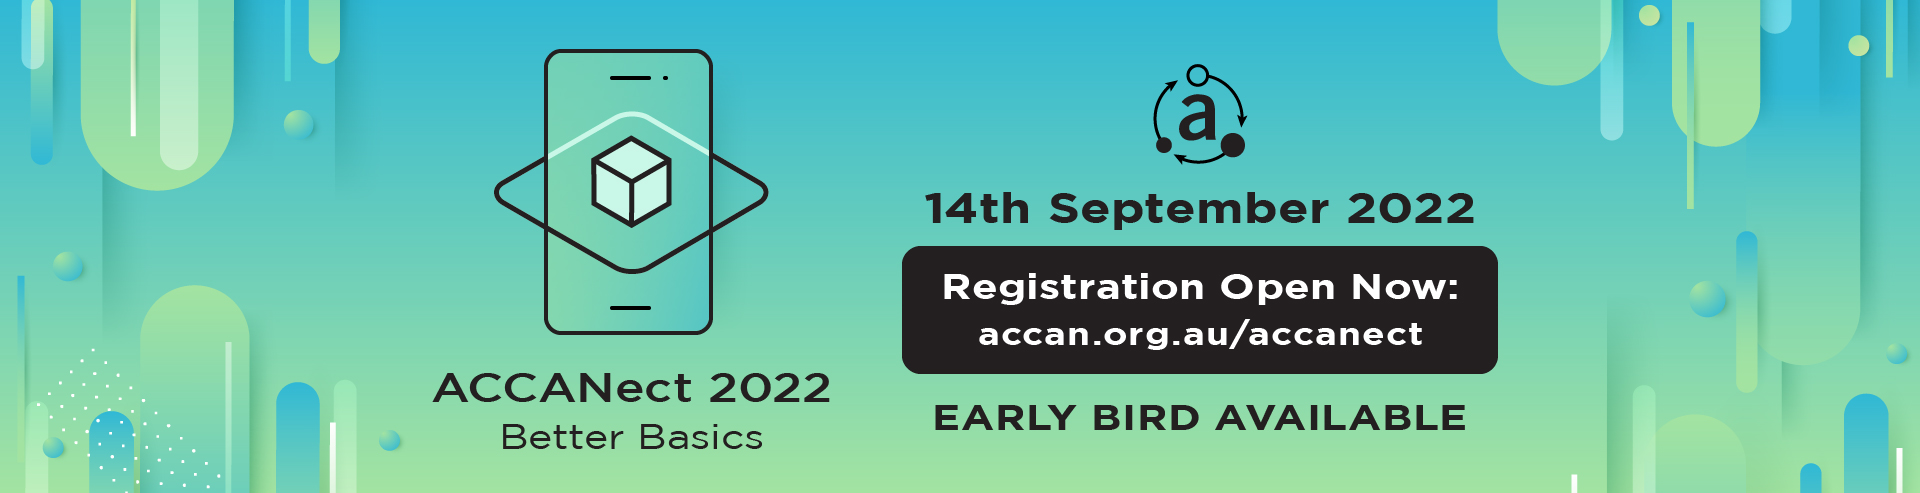 ACCANect2022 Webpage Banner